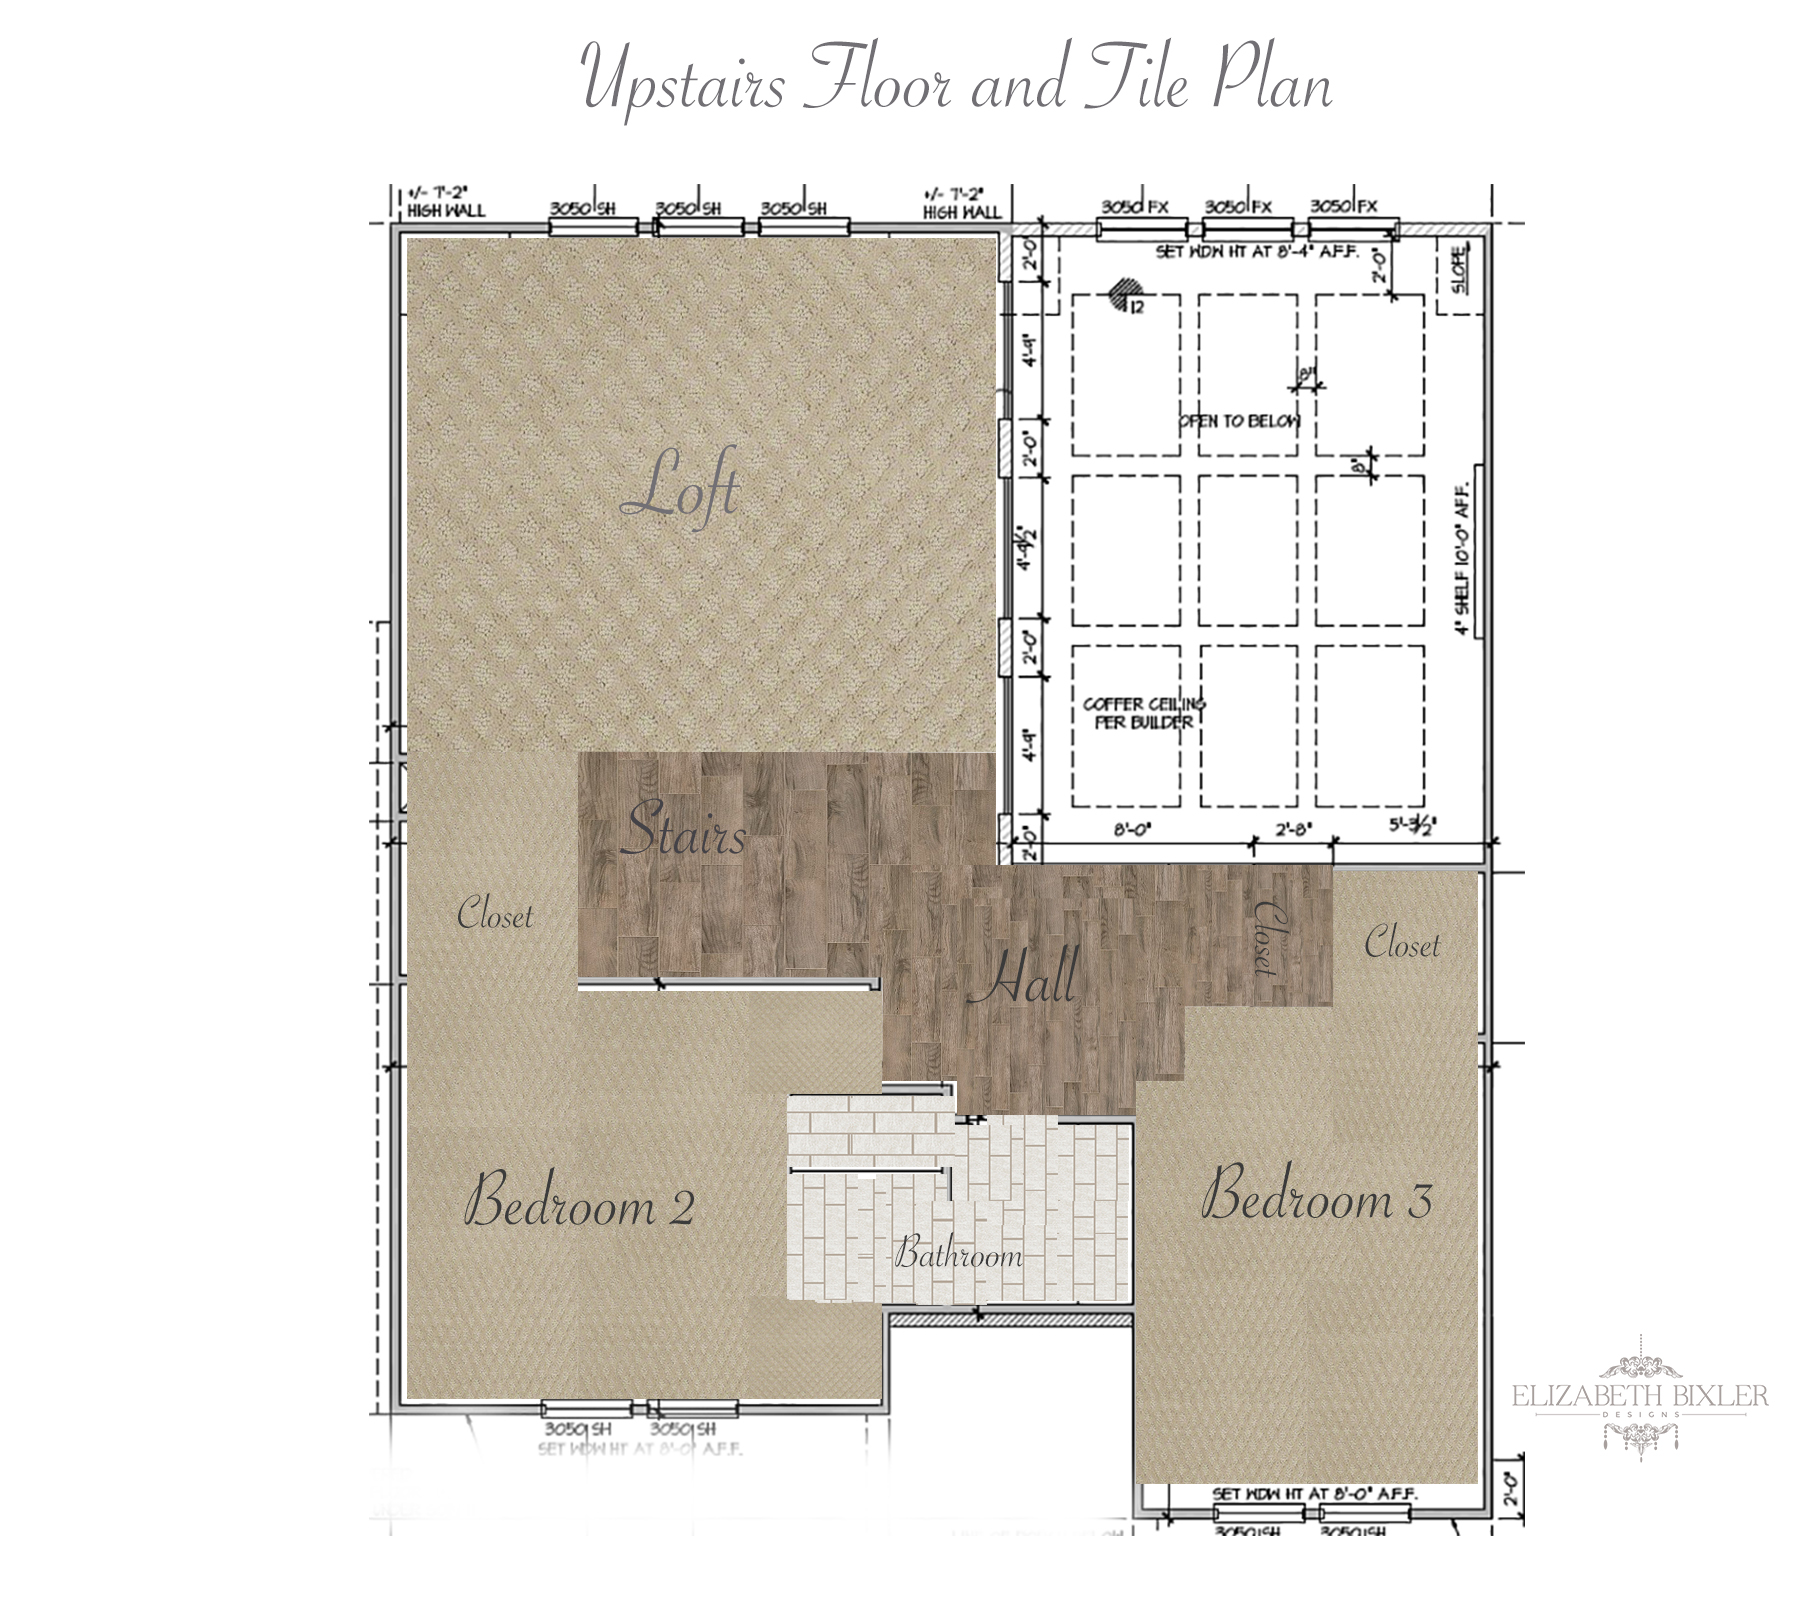 Flooring and Tile Plan Map with hardwood and concrete layout 